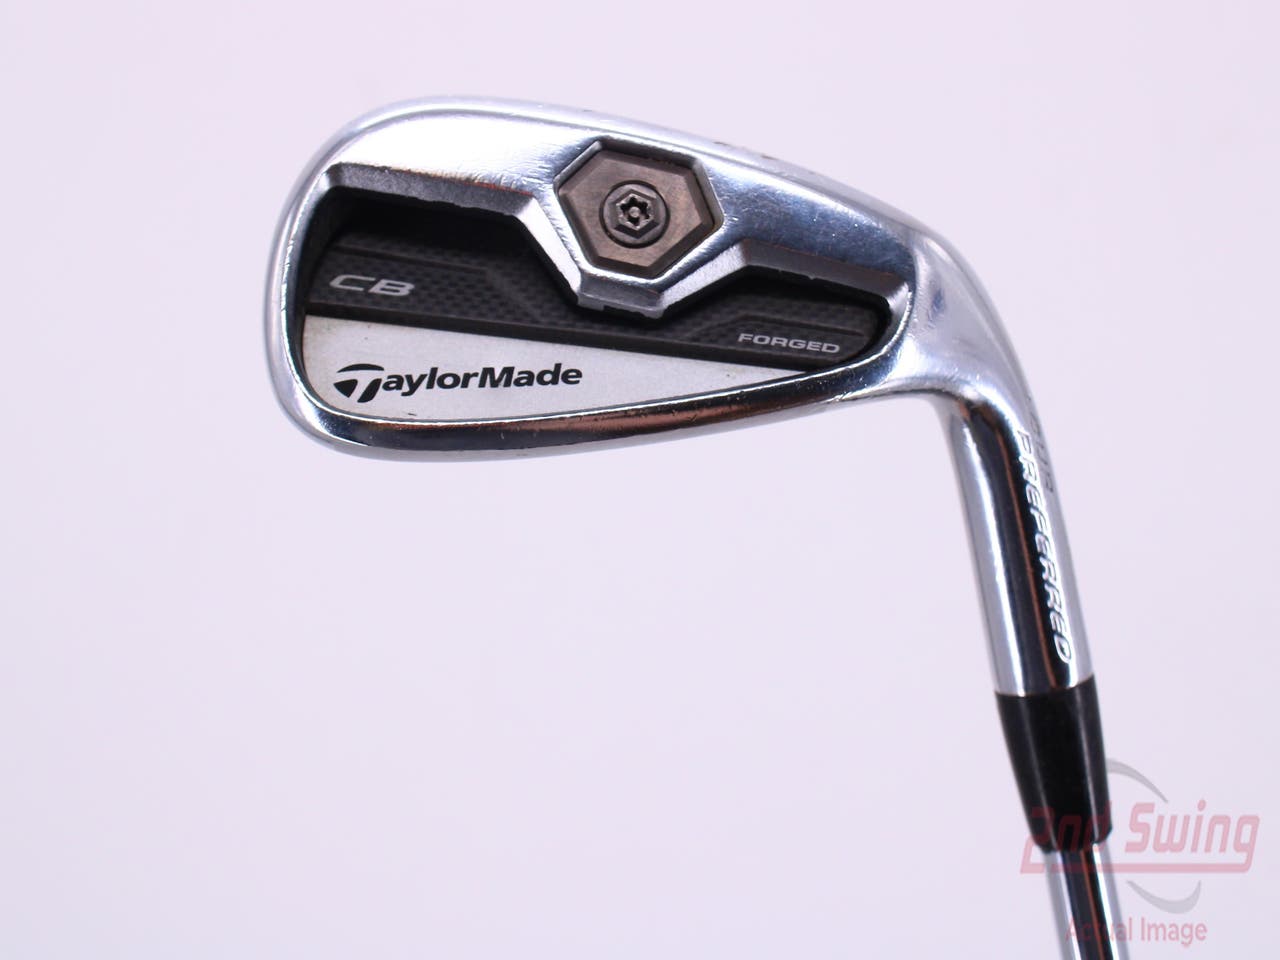 TaylorMade 2011 Tour Preferred CB Single Iron Pitching Wedge PW Dynamic Gold Tour Issue S400 Steel Stiff Right Handed 36.0in